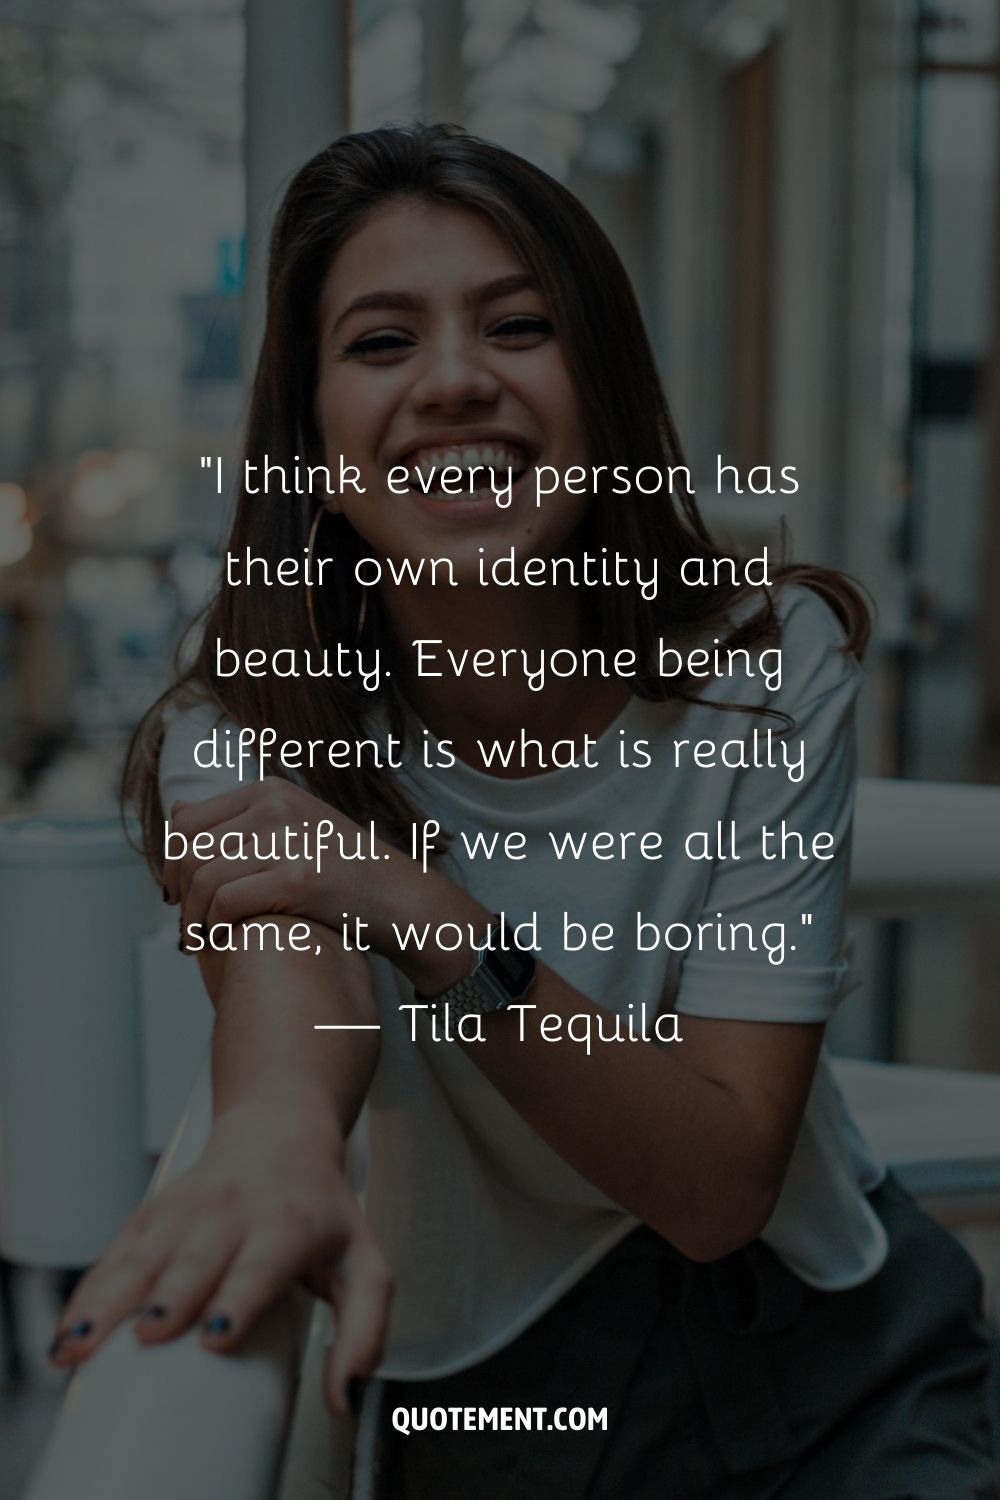 “I think every person has their own identity and beauty. Everyone being different is what is really beautiful. If we were all the same, it would be boring.” — Tila Tequil